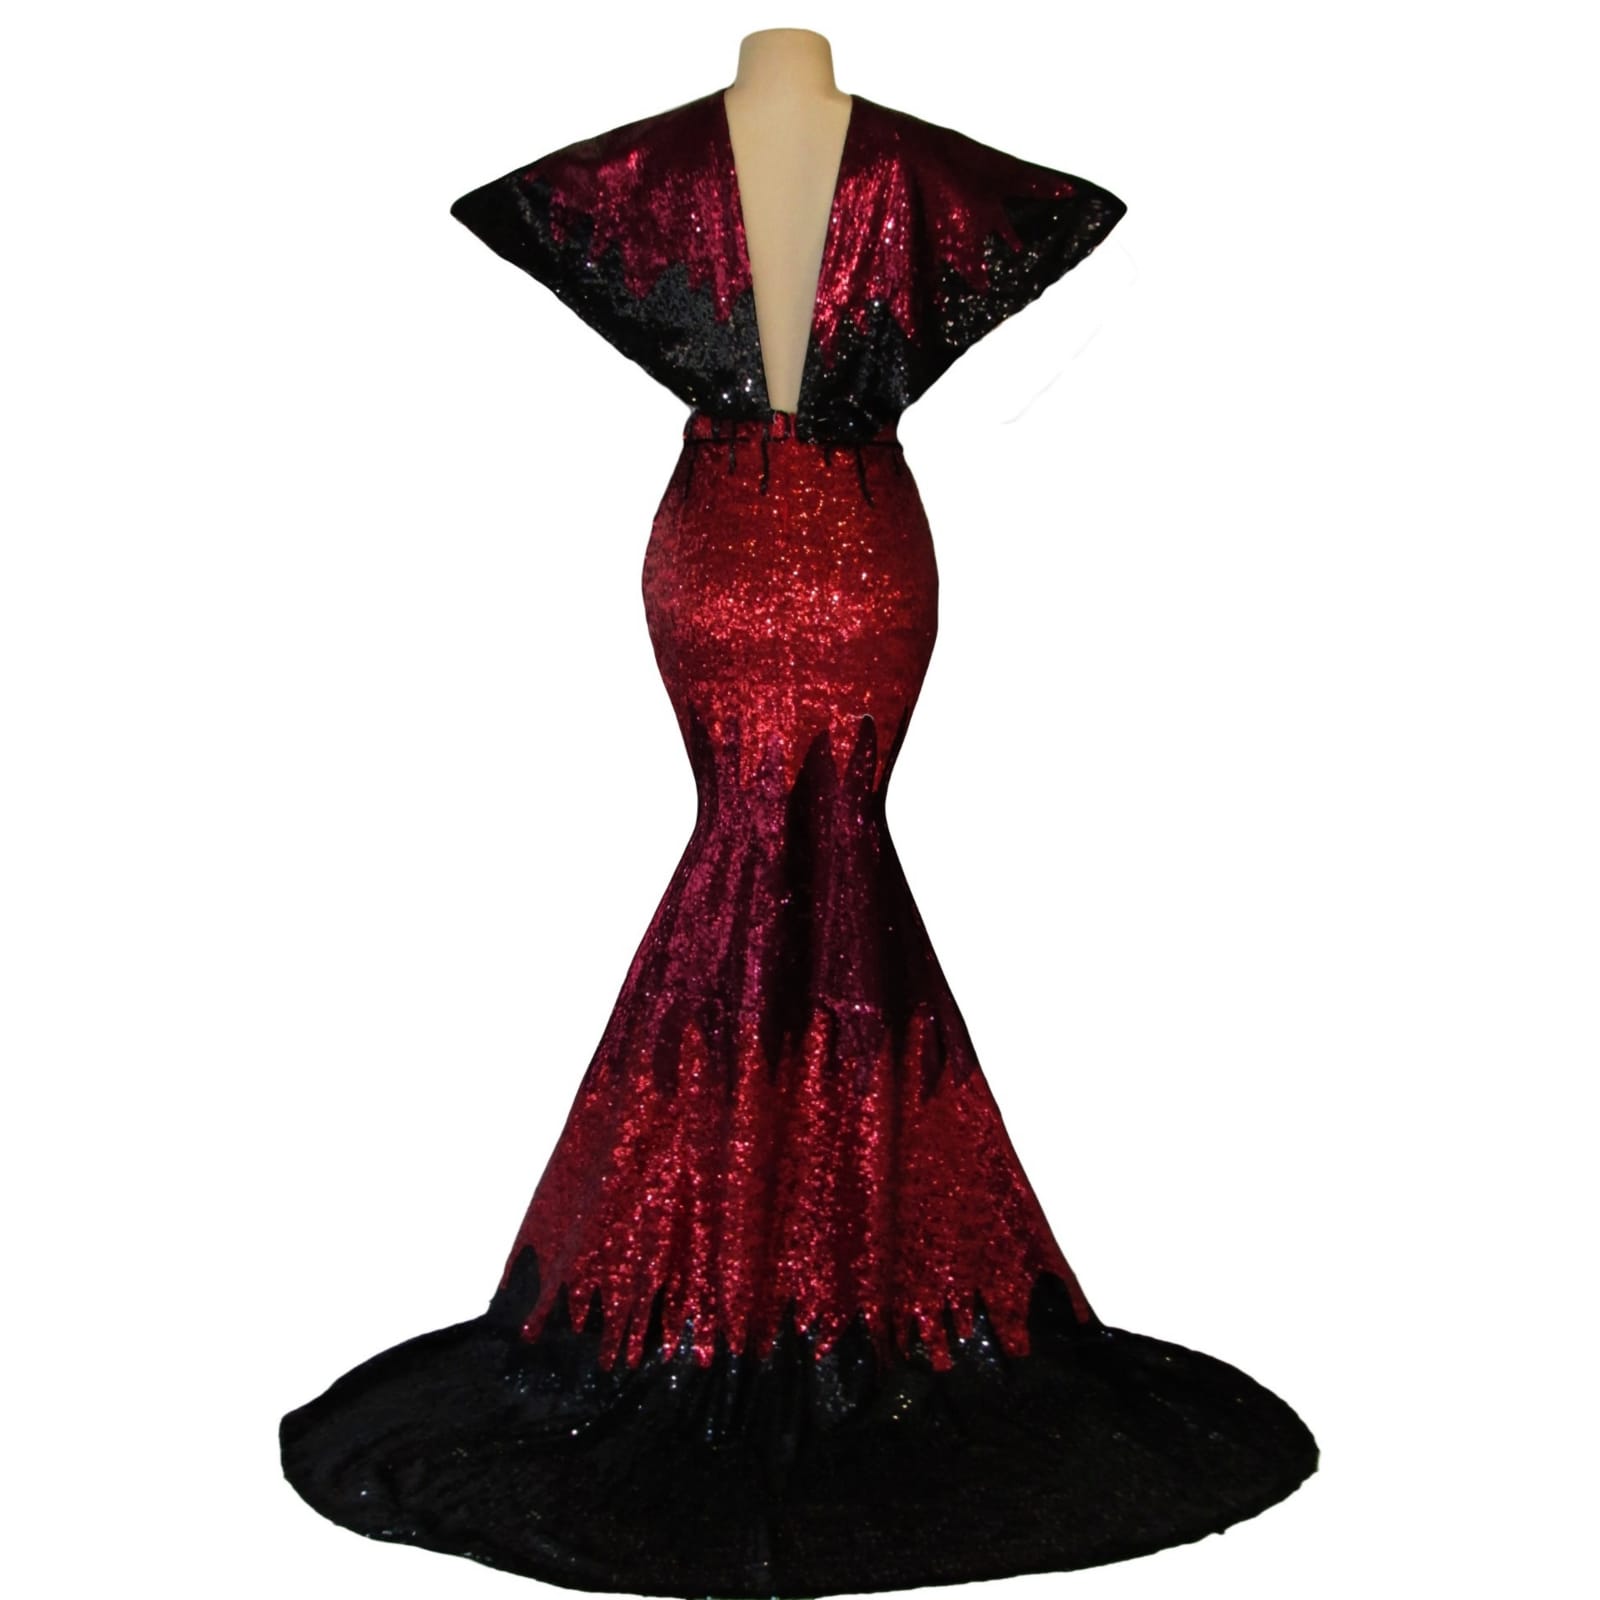 Maroon, burgundy and black sequins prom dress 2 maroon, burgundy and black fully sequined soft mermaid, plunging neckline prom dance dress. With a v open back and wide shoulders creating a short sleeve.